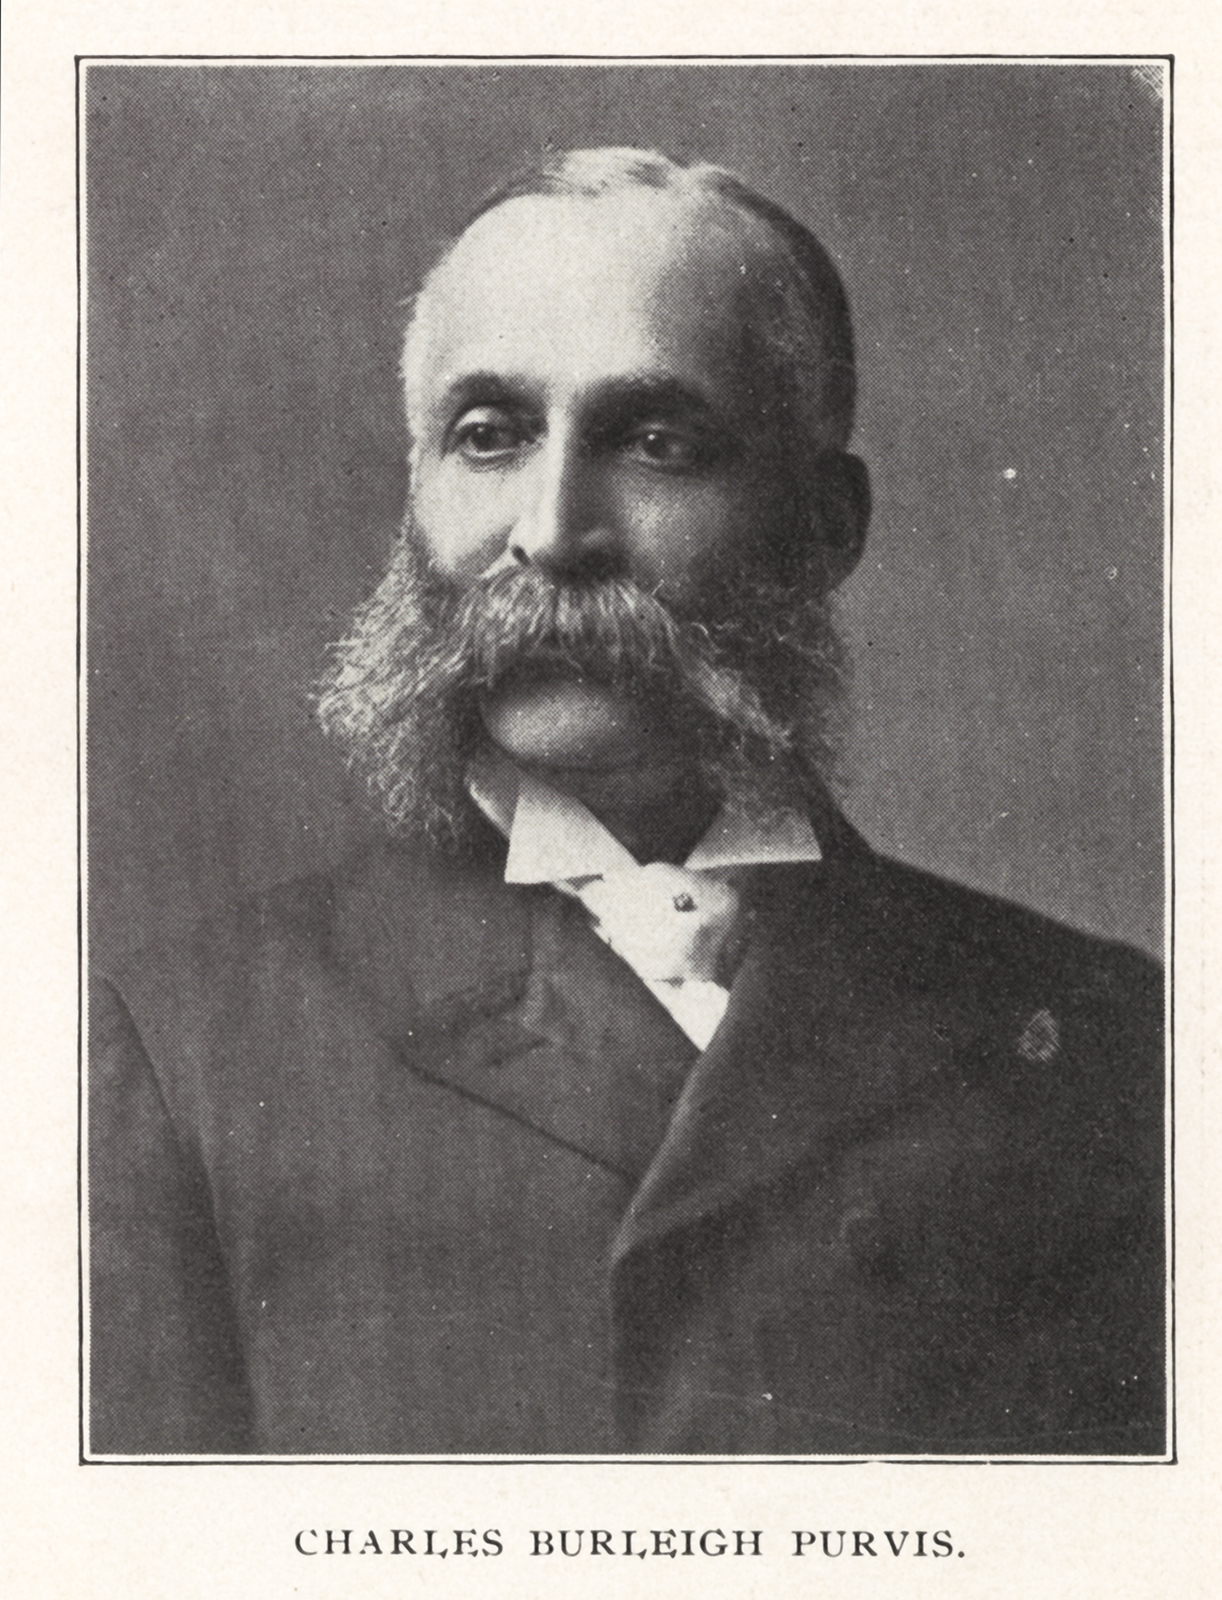 Portrait of Charles Burleigh Purvis, MD, ca. 1900.